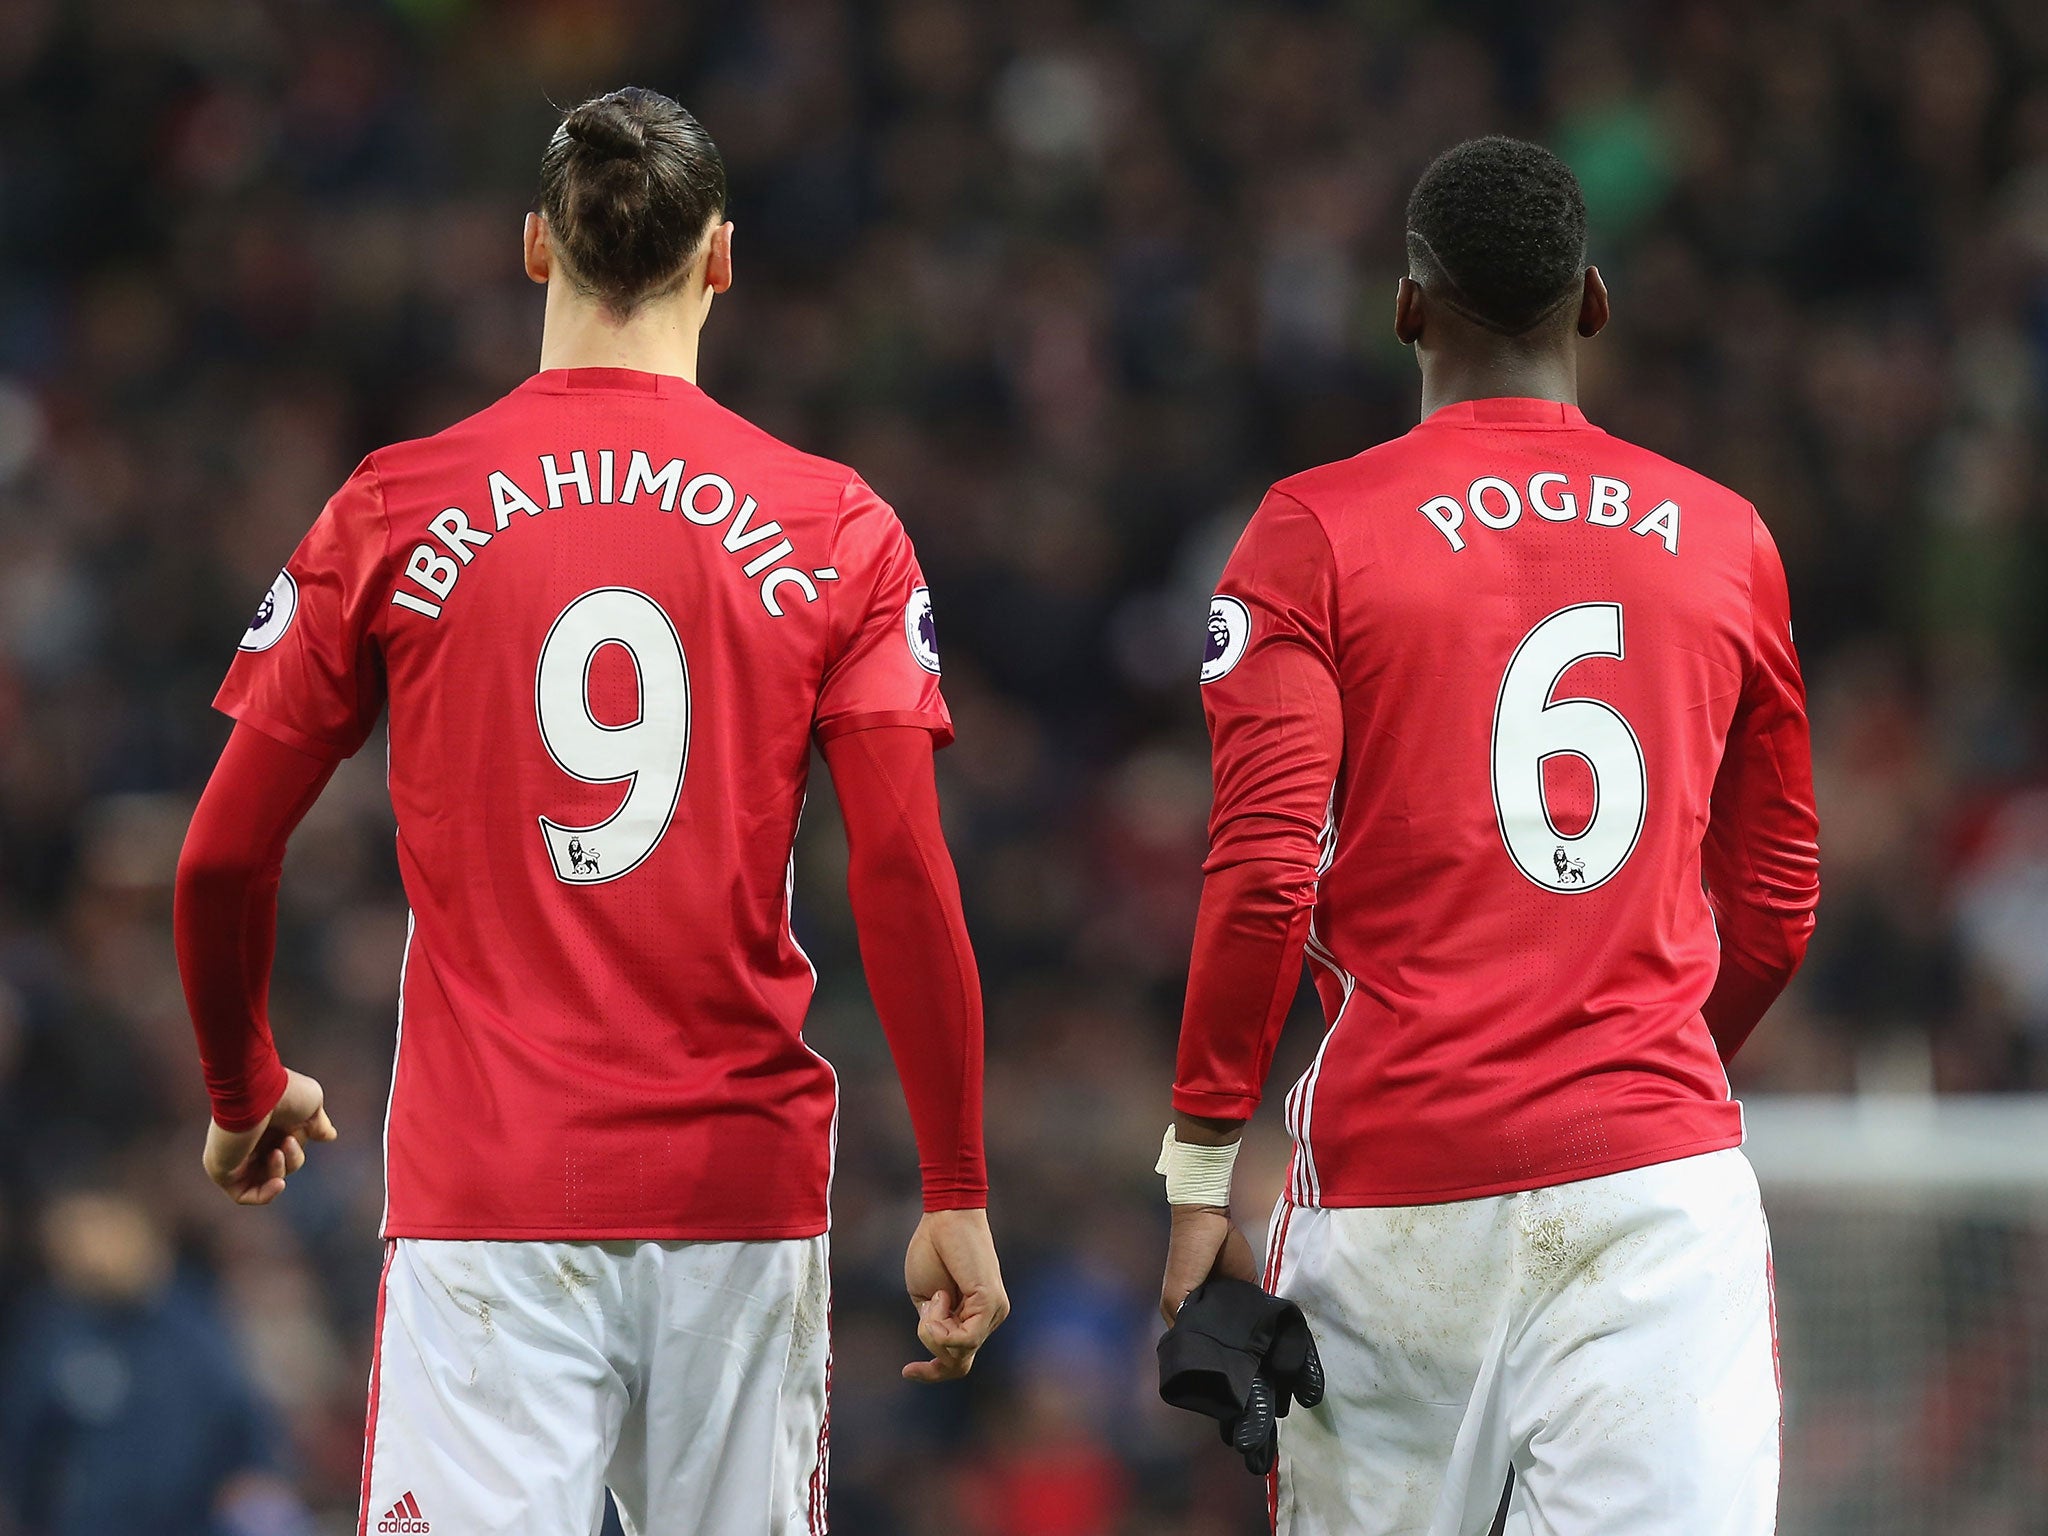 Paul Pogba and Zlatan Ibrahimovic are finally starting to gel on the pitch